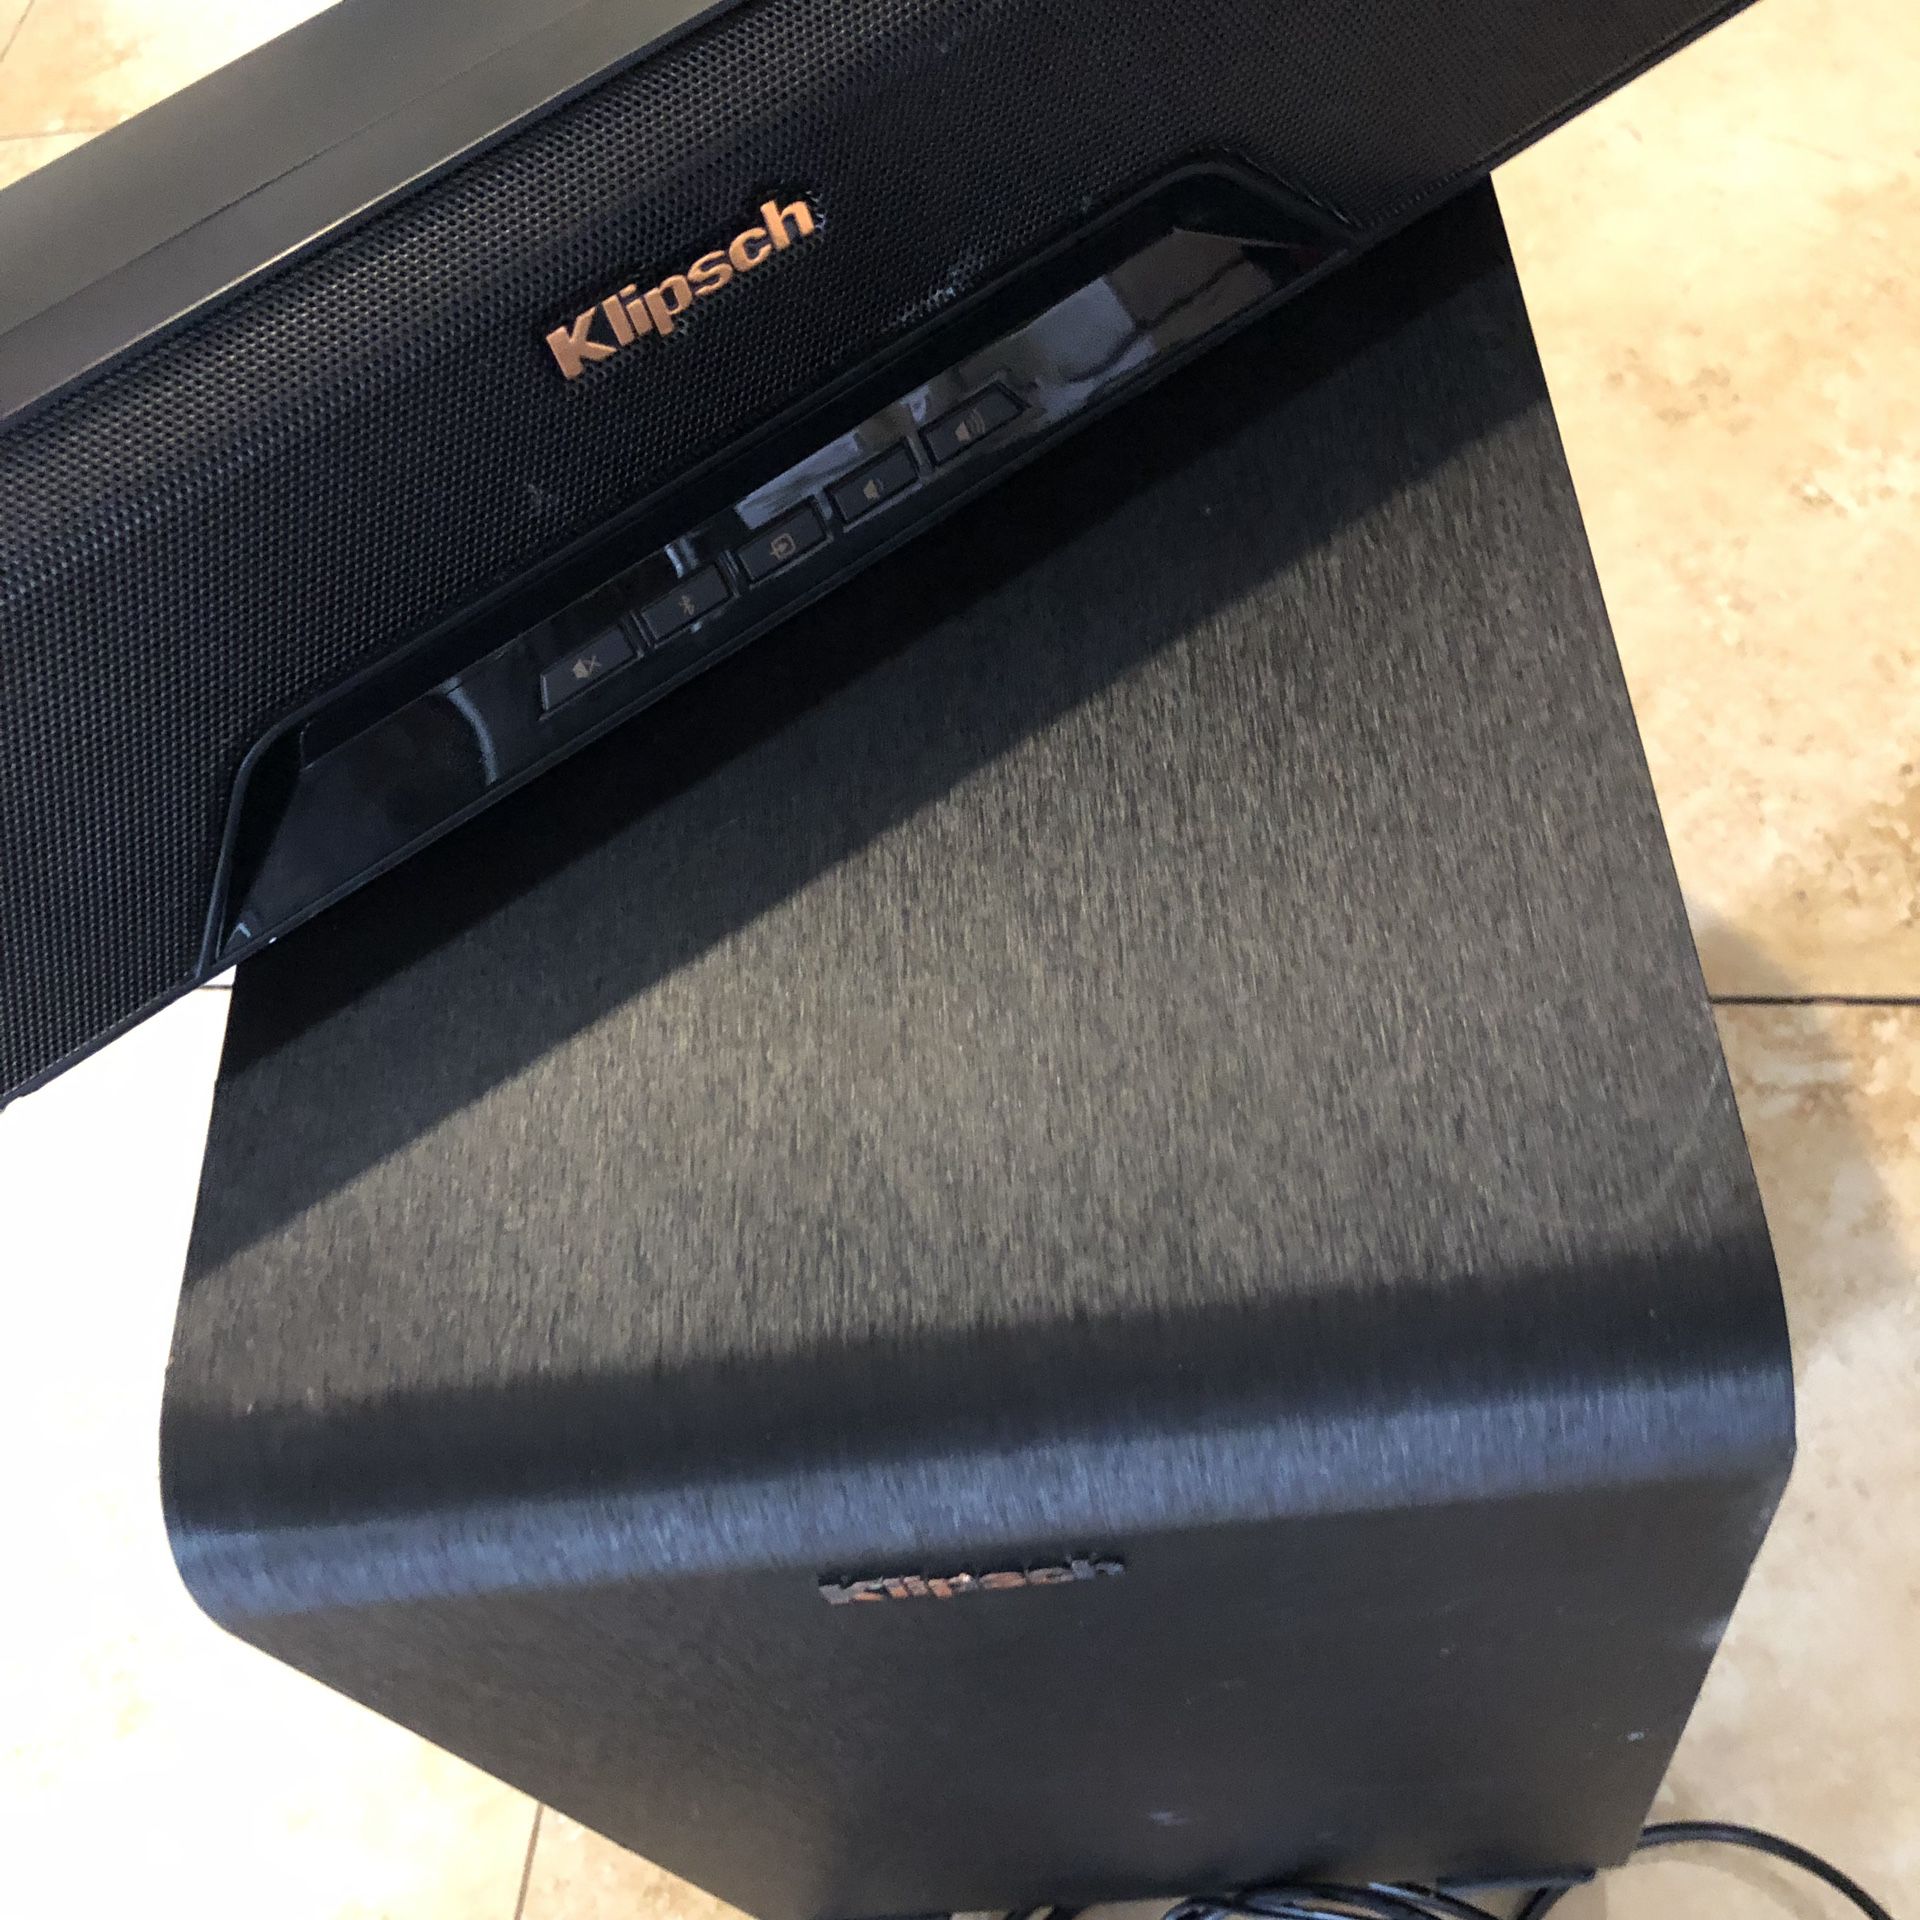 Klipsch RSB-11 Powered Sound Bar 4K Pass, Wireless Sub, Bluetooth Used tested working powerful with super bass